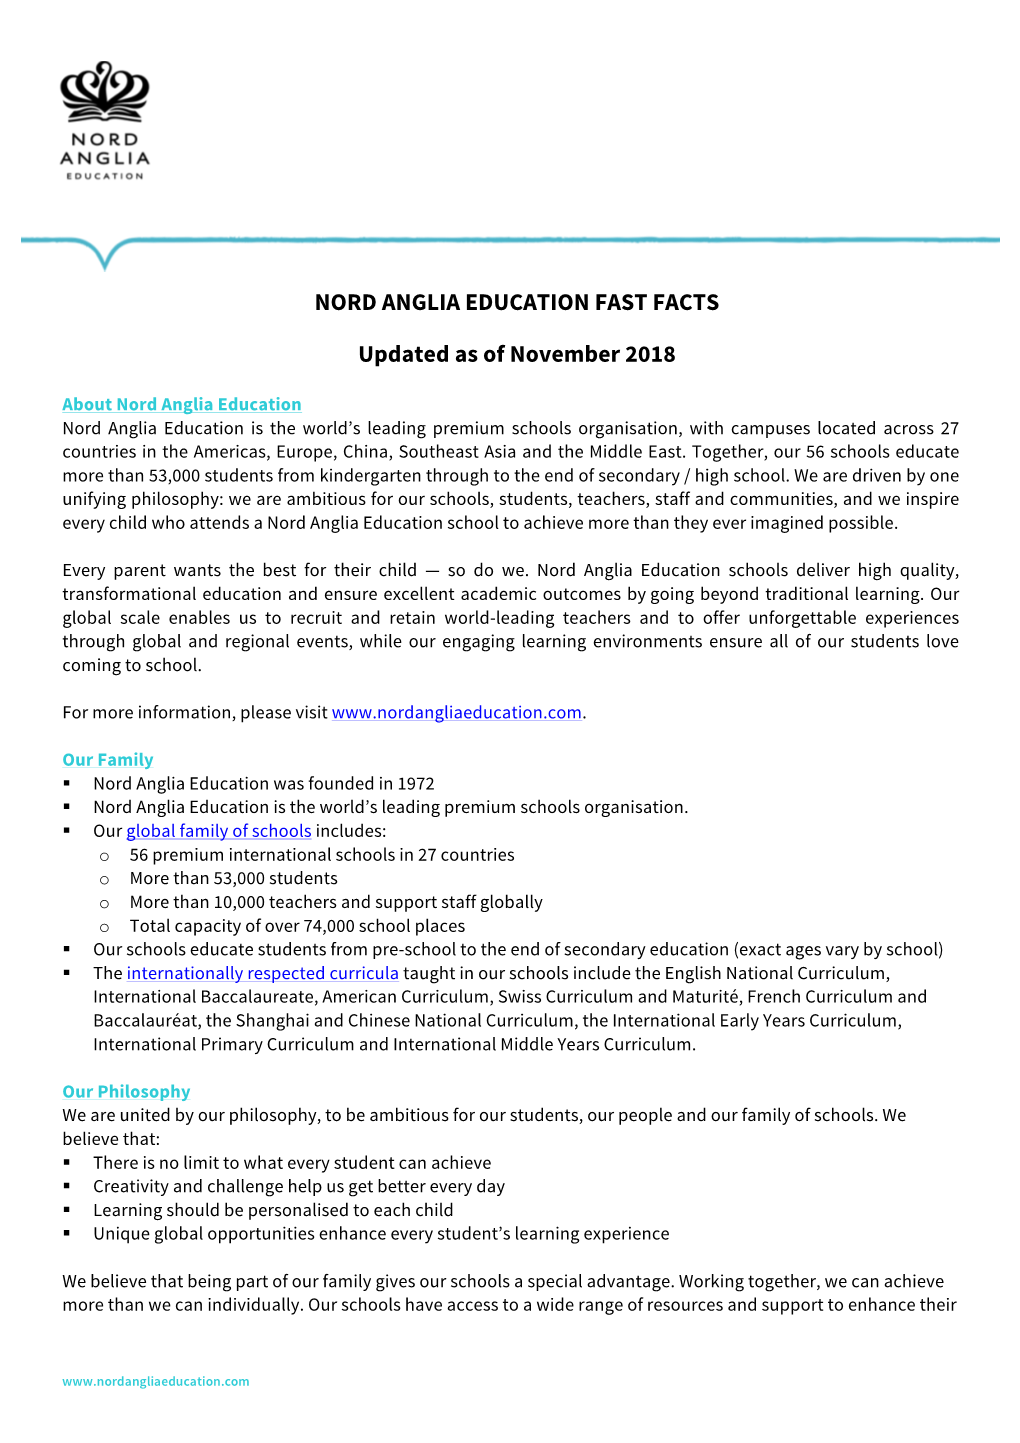 NORD ANGLIA EDUCATION FAST FACTS Updated As of November